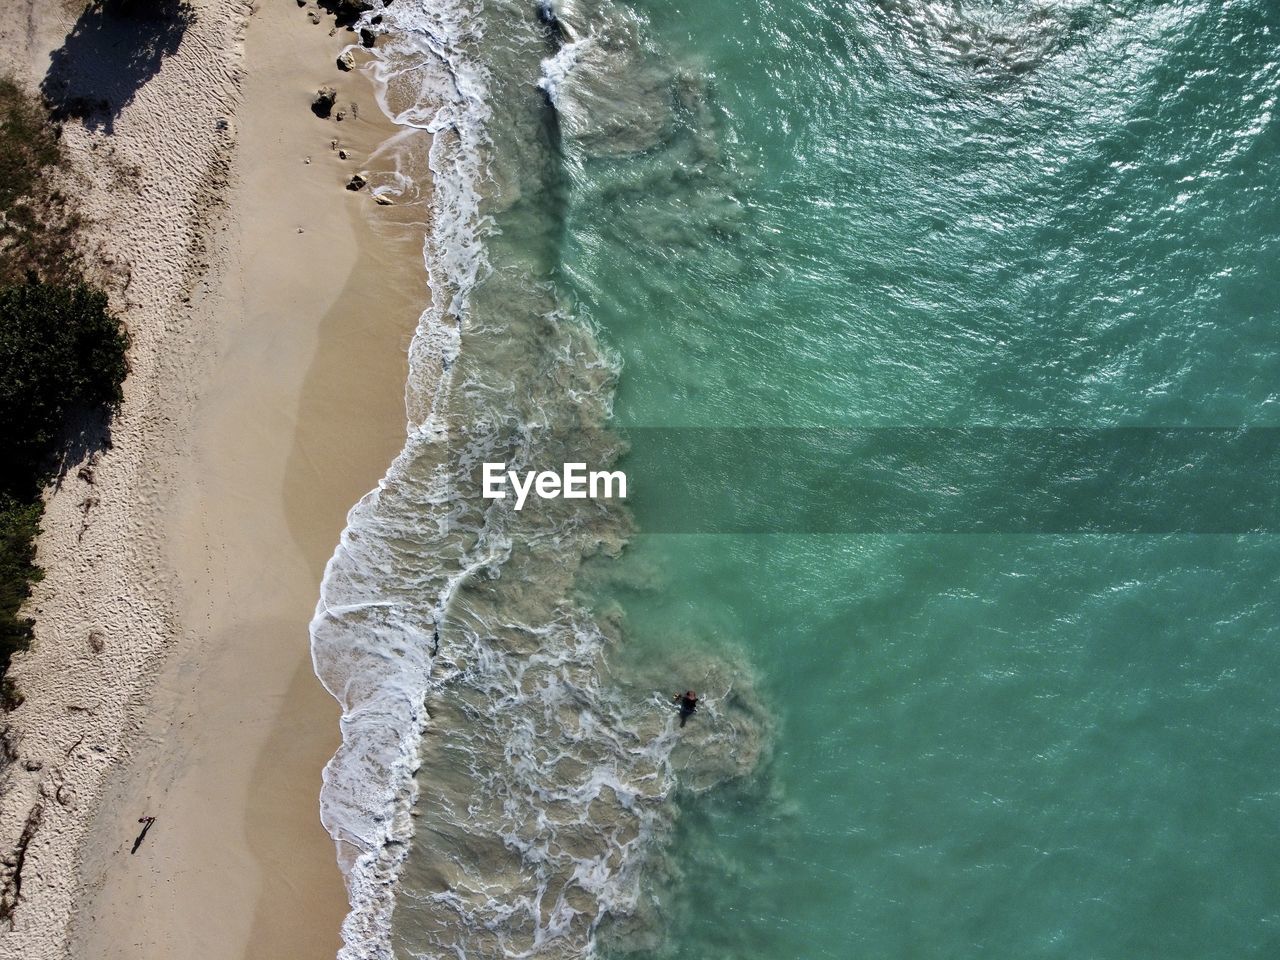 water, sea, wave, land, beach, high angle view, ocean, nature, beauty in nature, wind wave, sports, motion, day, water sports, coast, surfing, scenics - nature, terrain, outdoors, body of water, sand, shore, travel, tranquility, green, travel destinations, environment, sunlight, coastline, aerial view